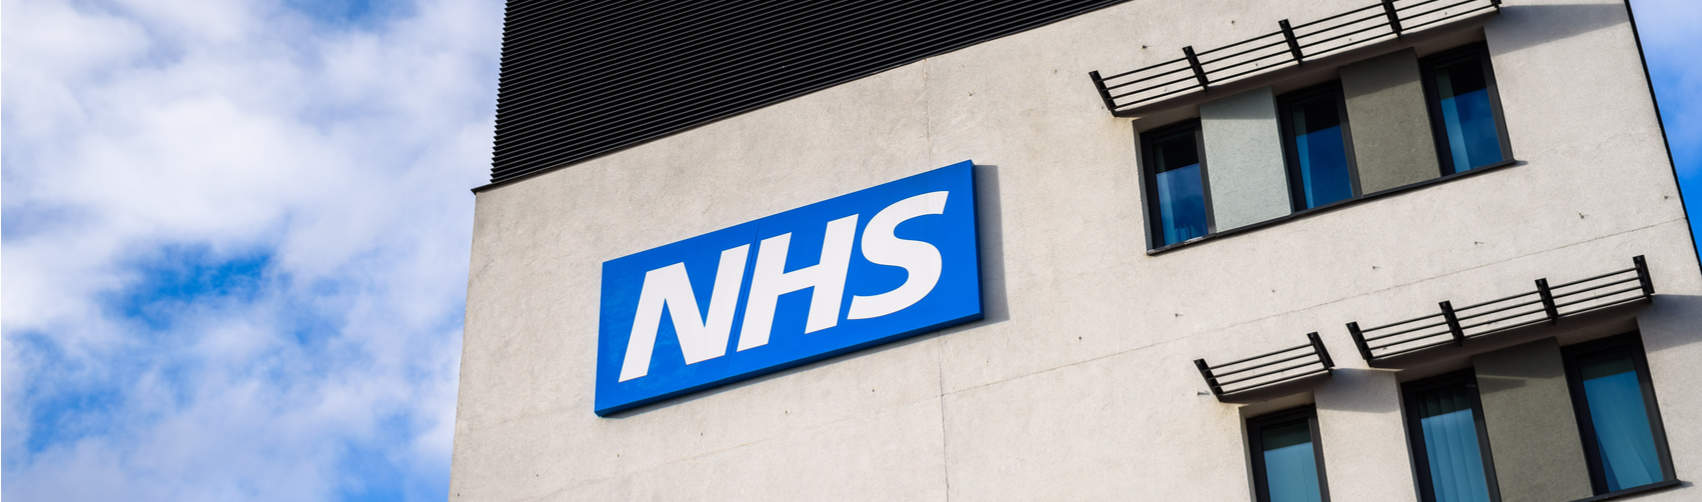 NHS A&E four-hour target may end